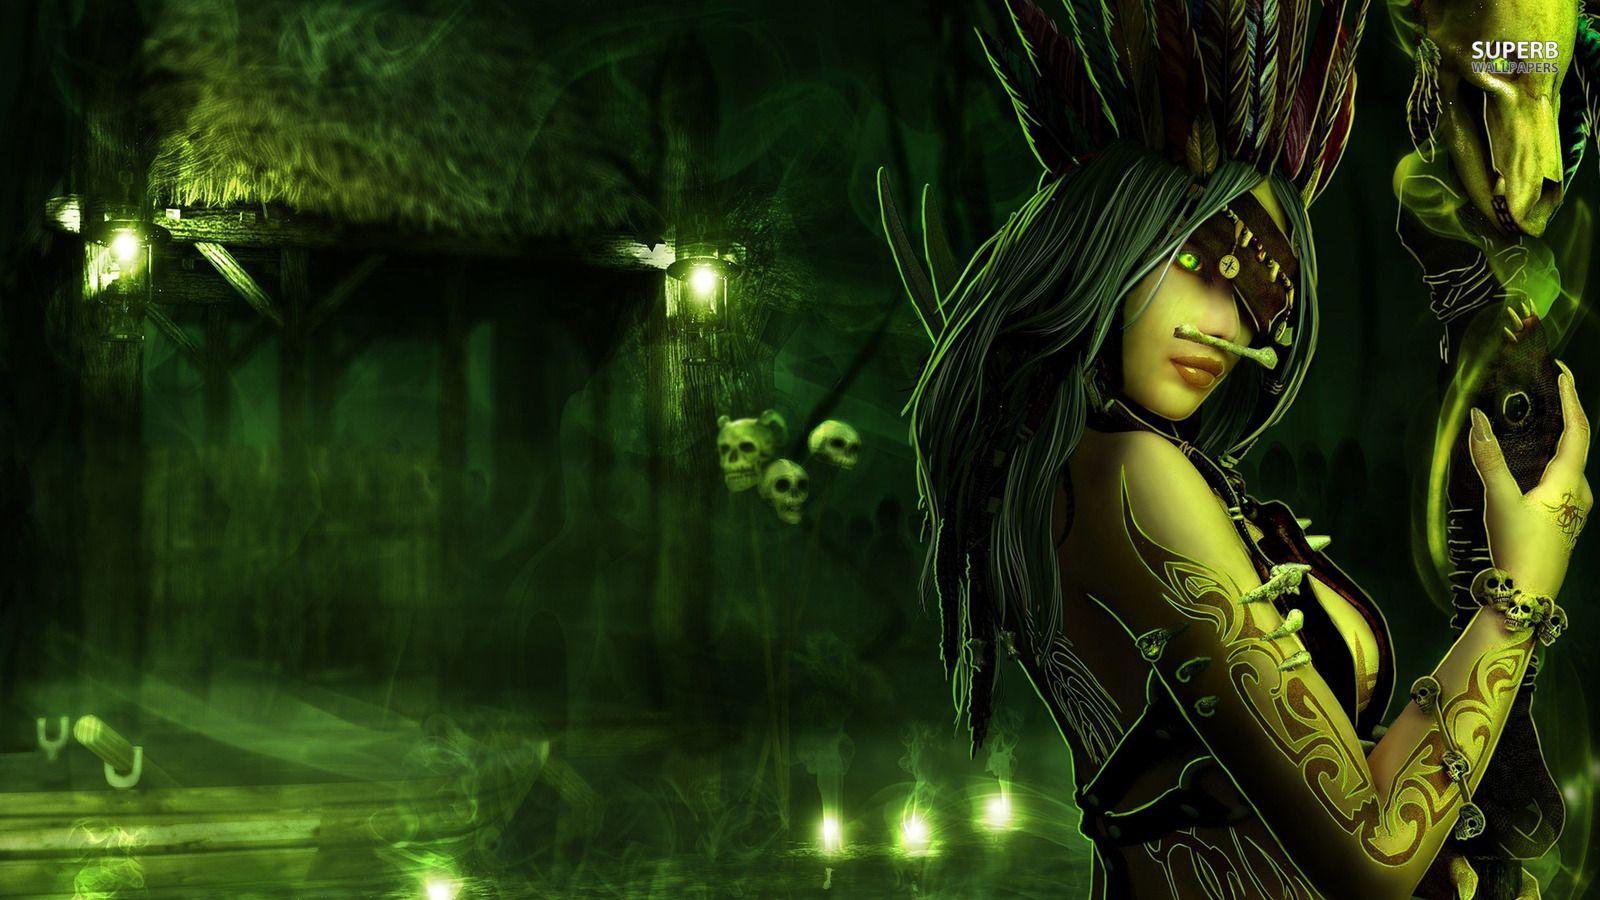 Voodoo Priestess wallpaper. Voodoo. Witch picture, Mysterious